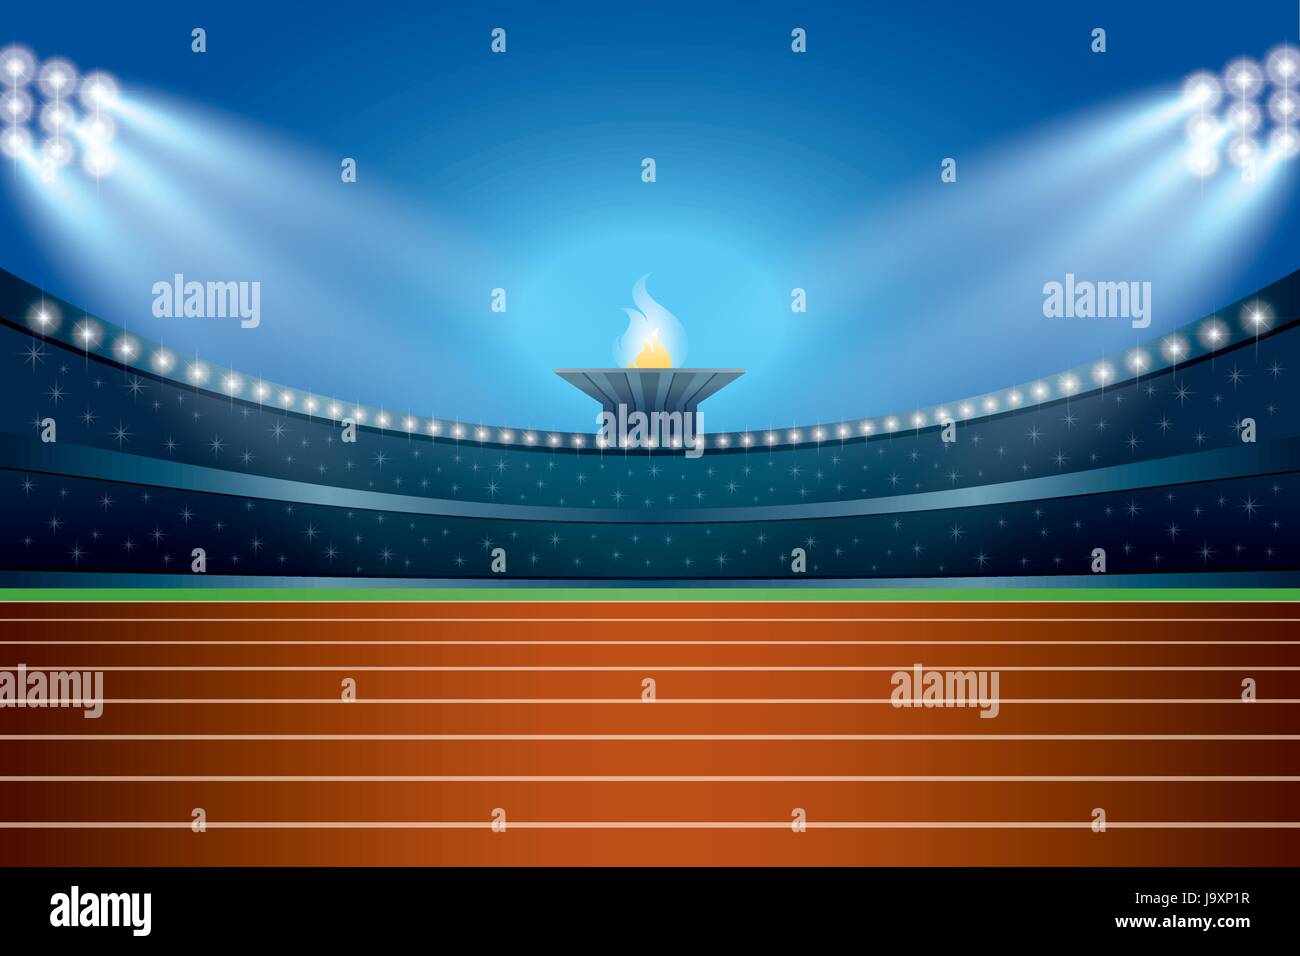 Athletics stadium with track at general front night view. Ceremony Event Athletes on Torch Background. Vector Illustration Stock Vector